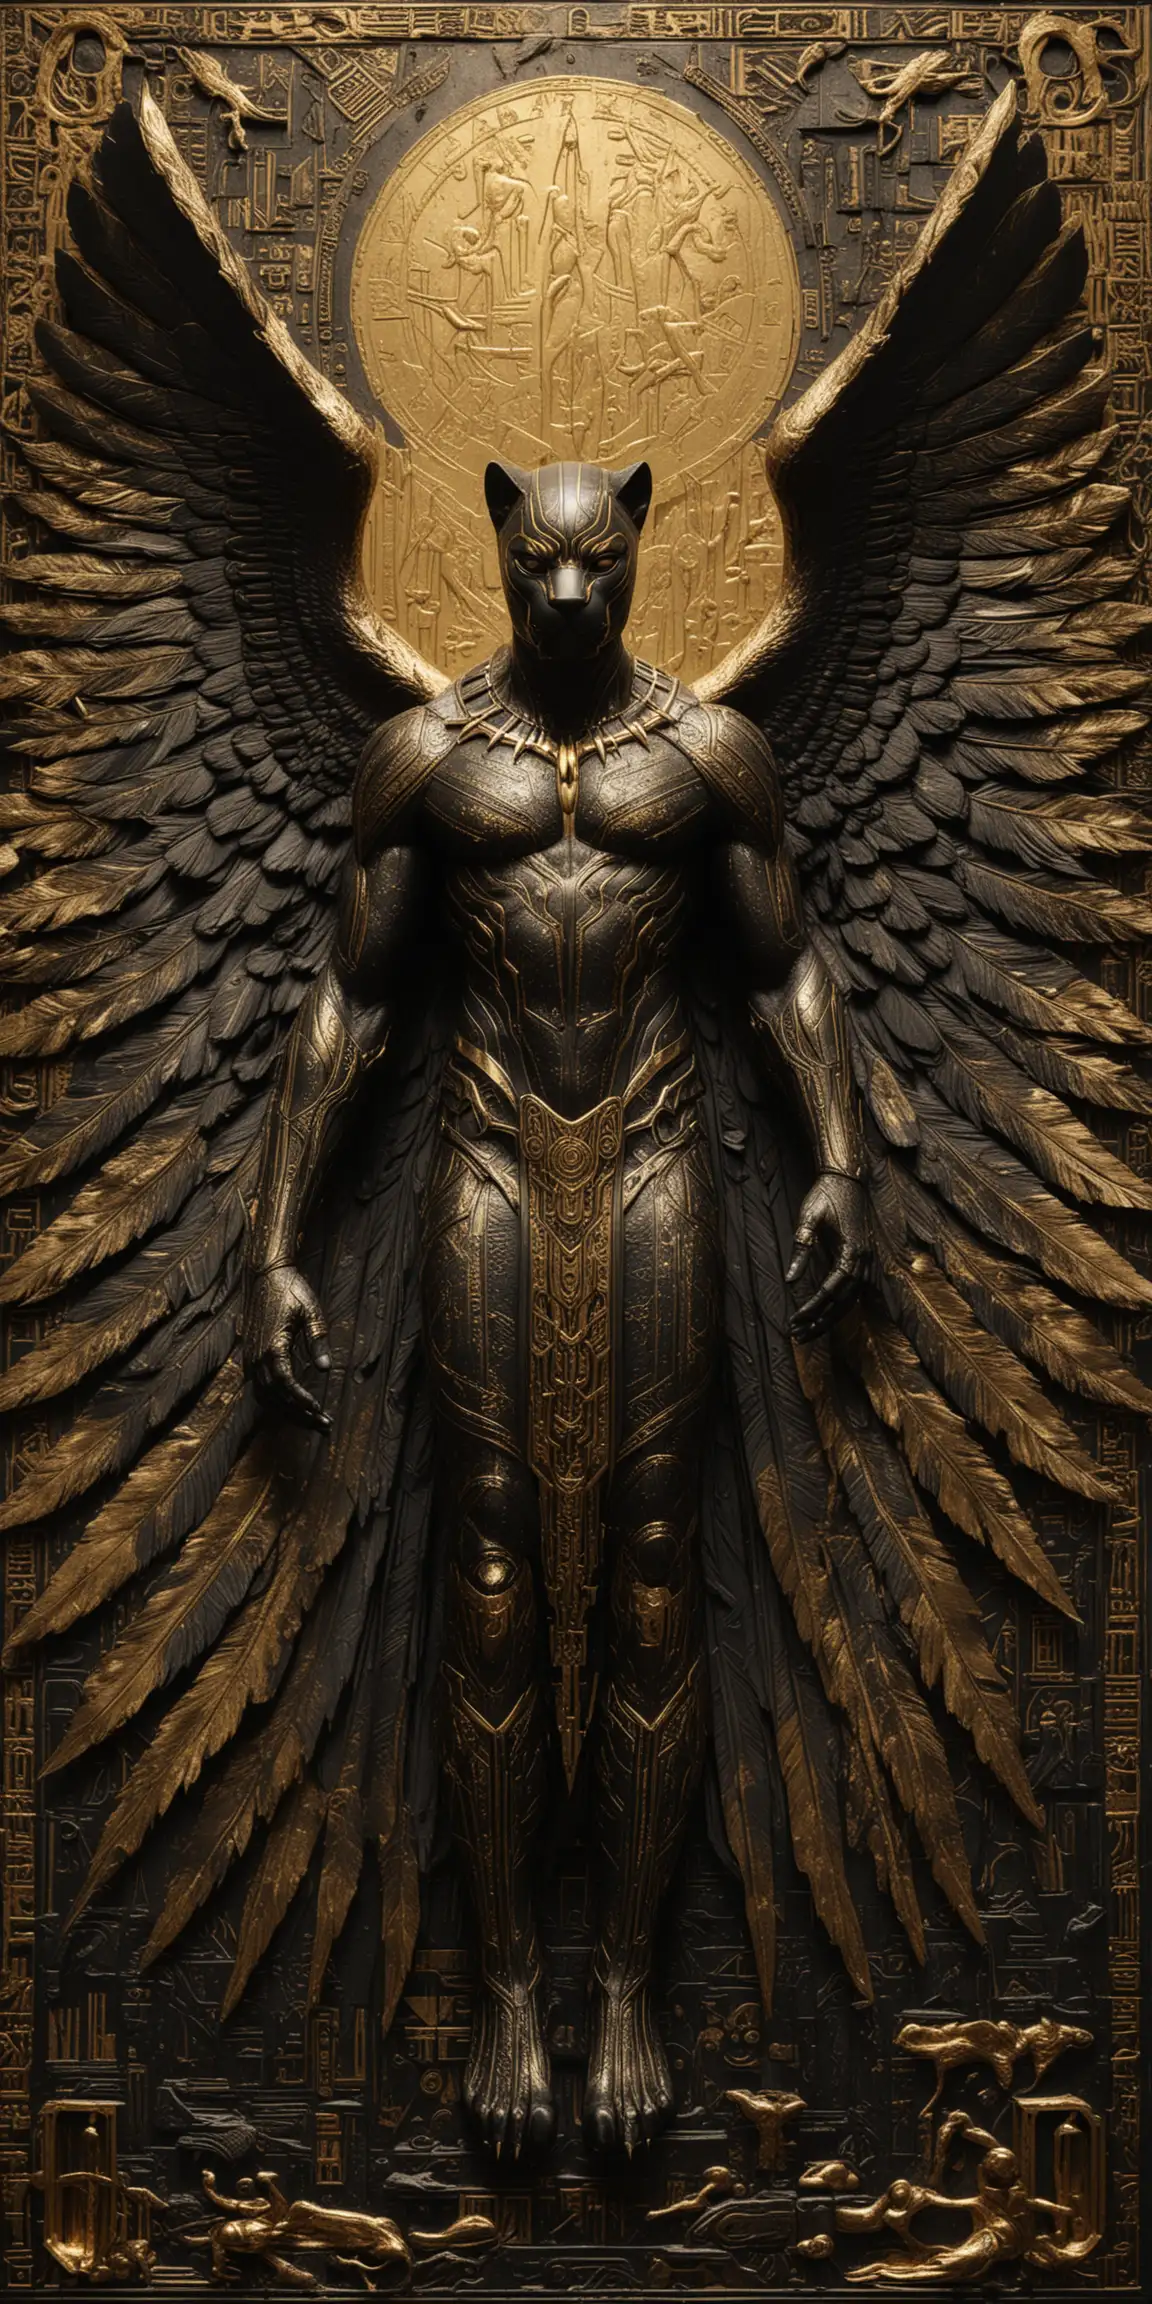 Surreal Black Panther with Angel Wings Intricately Etched Gold Metal Artwork